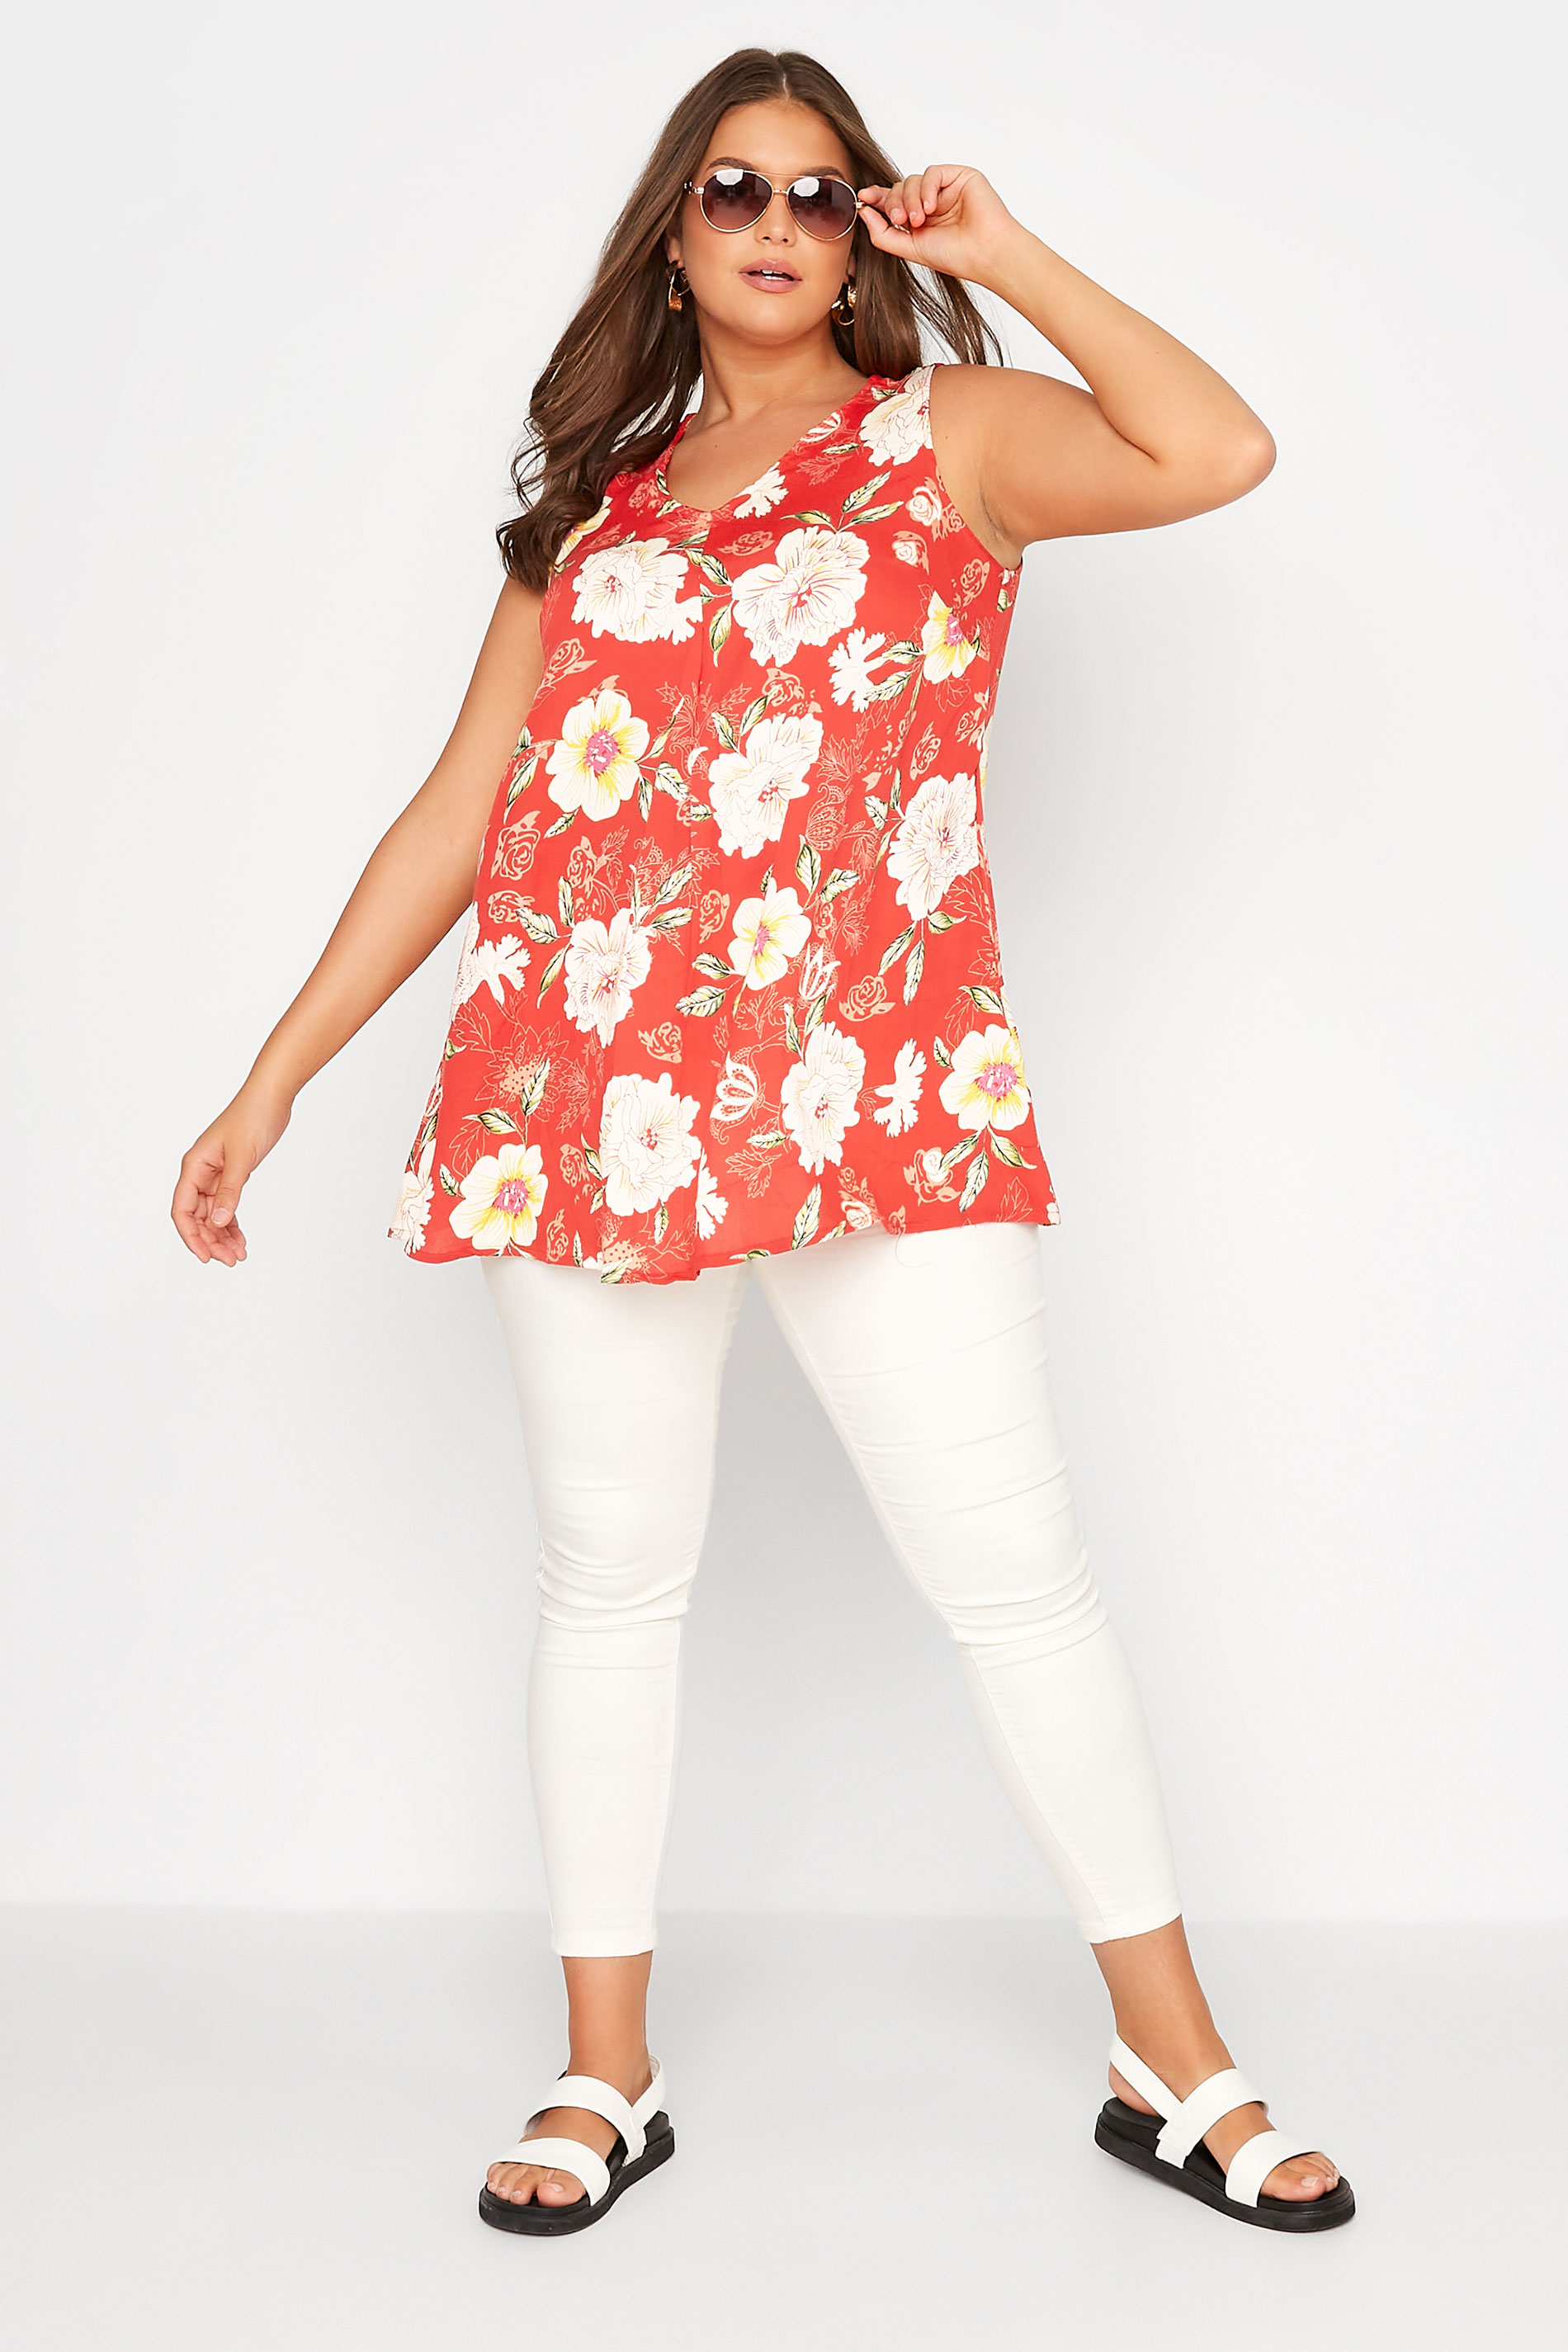 Grande taille  Tops Grande taille  Tops Casual | Curve Red Floral Swing Vest Top - IW90130